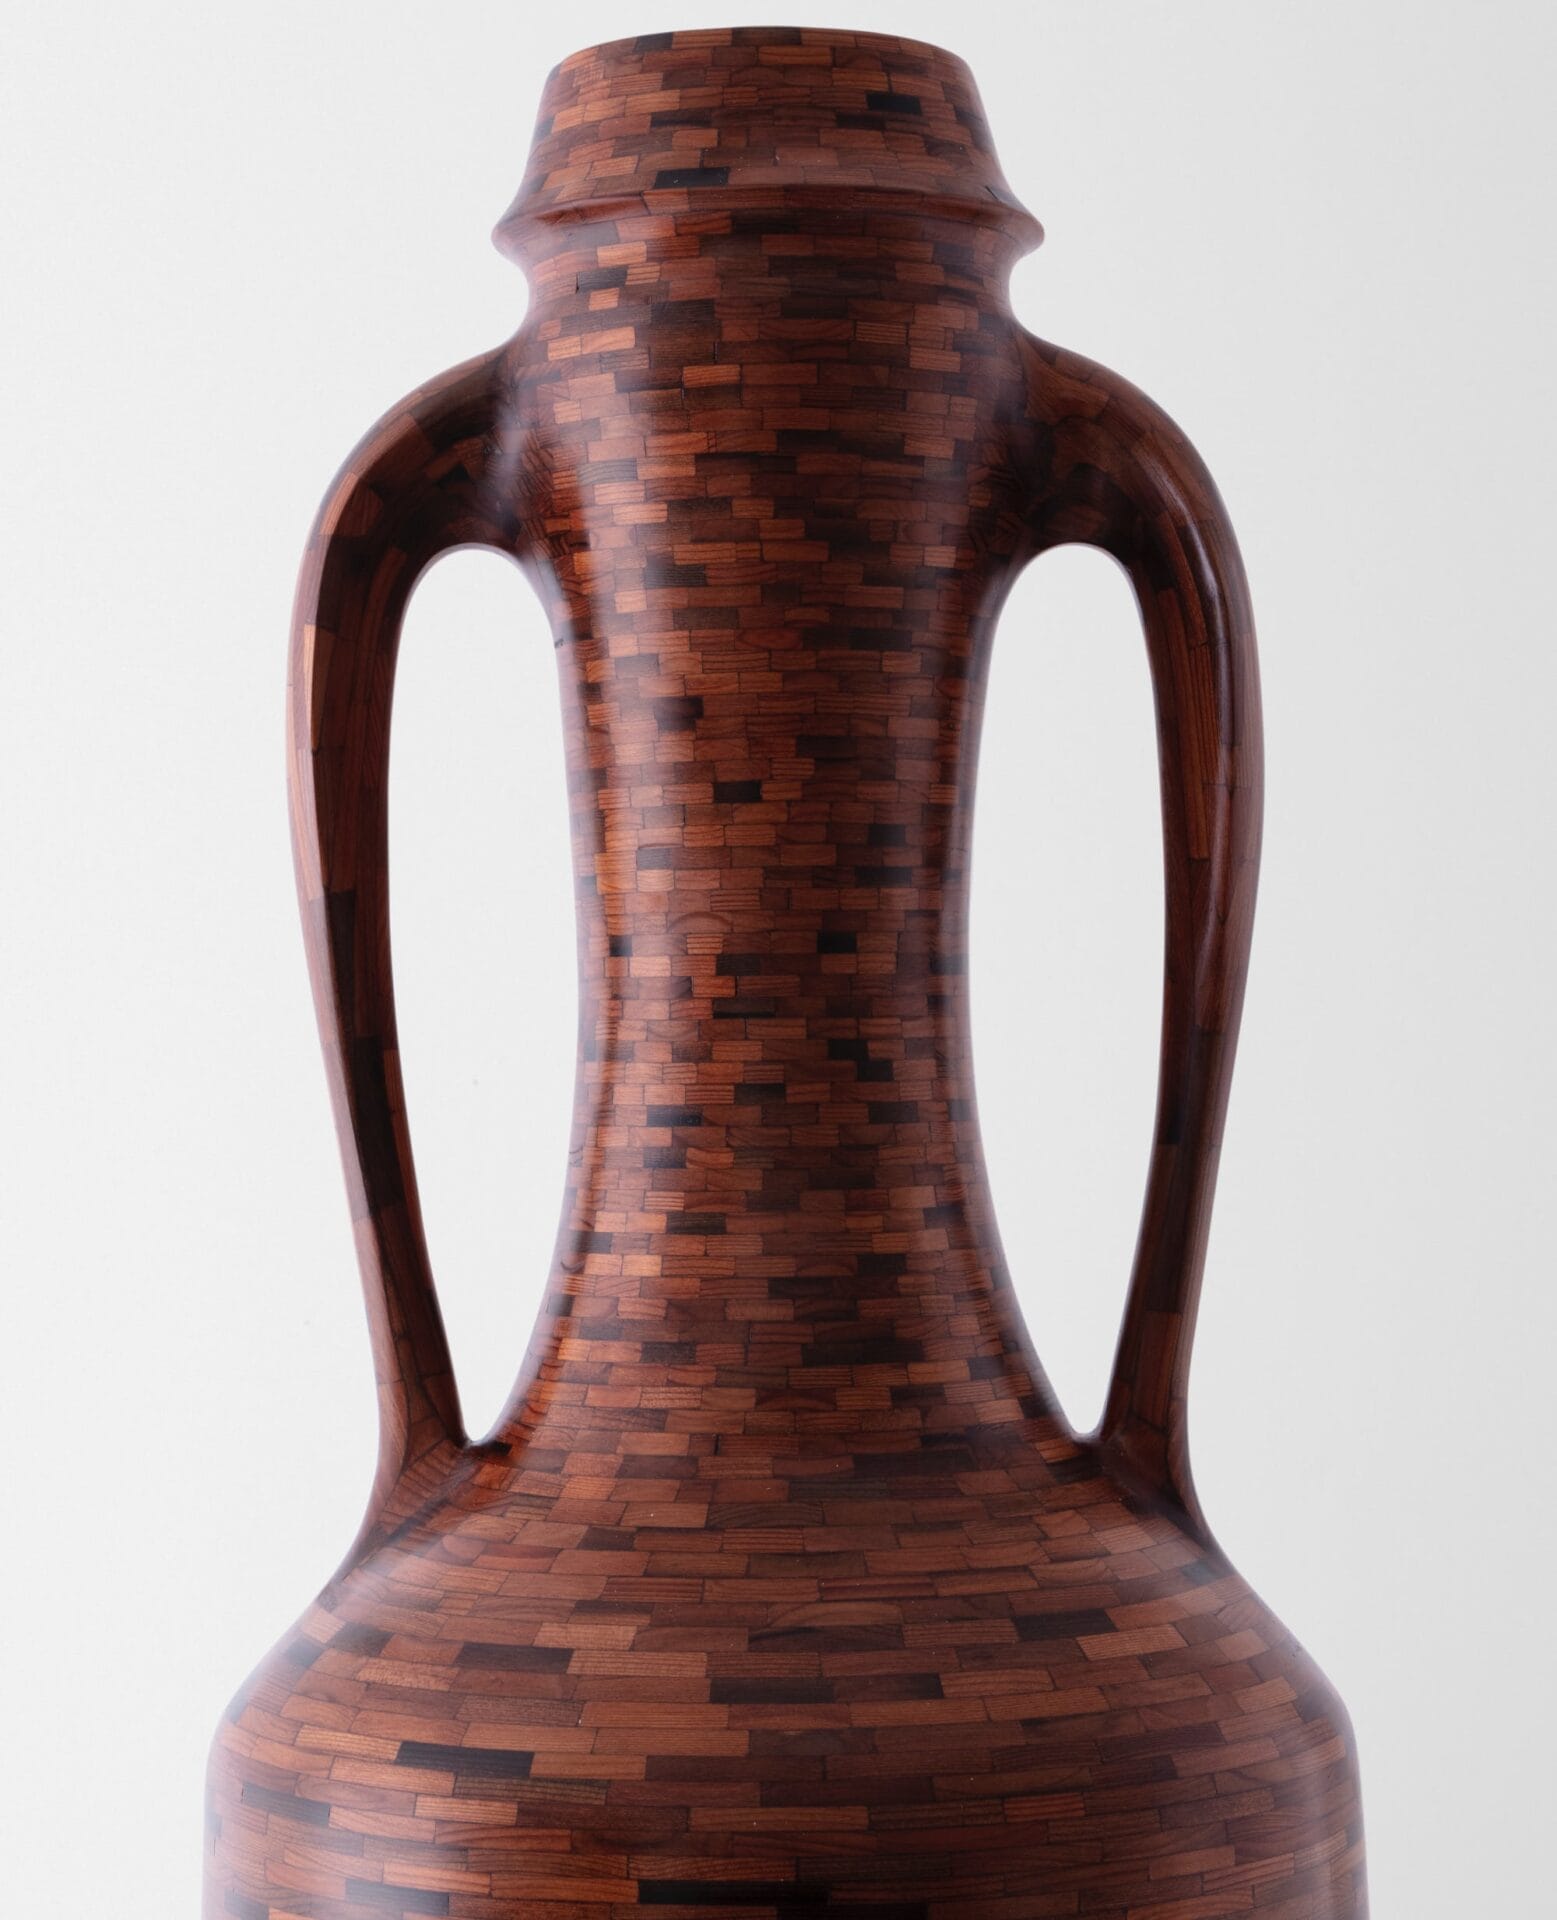 a detail of a wooden amphora made of small components